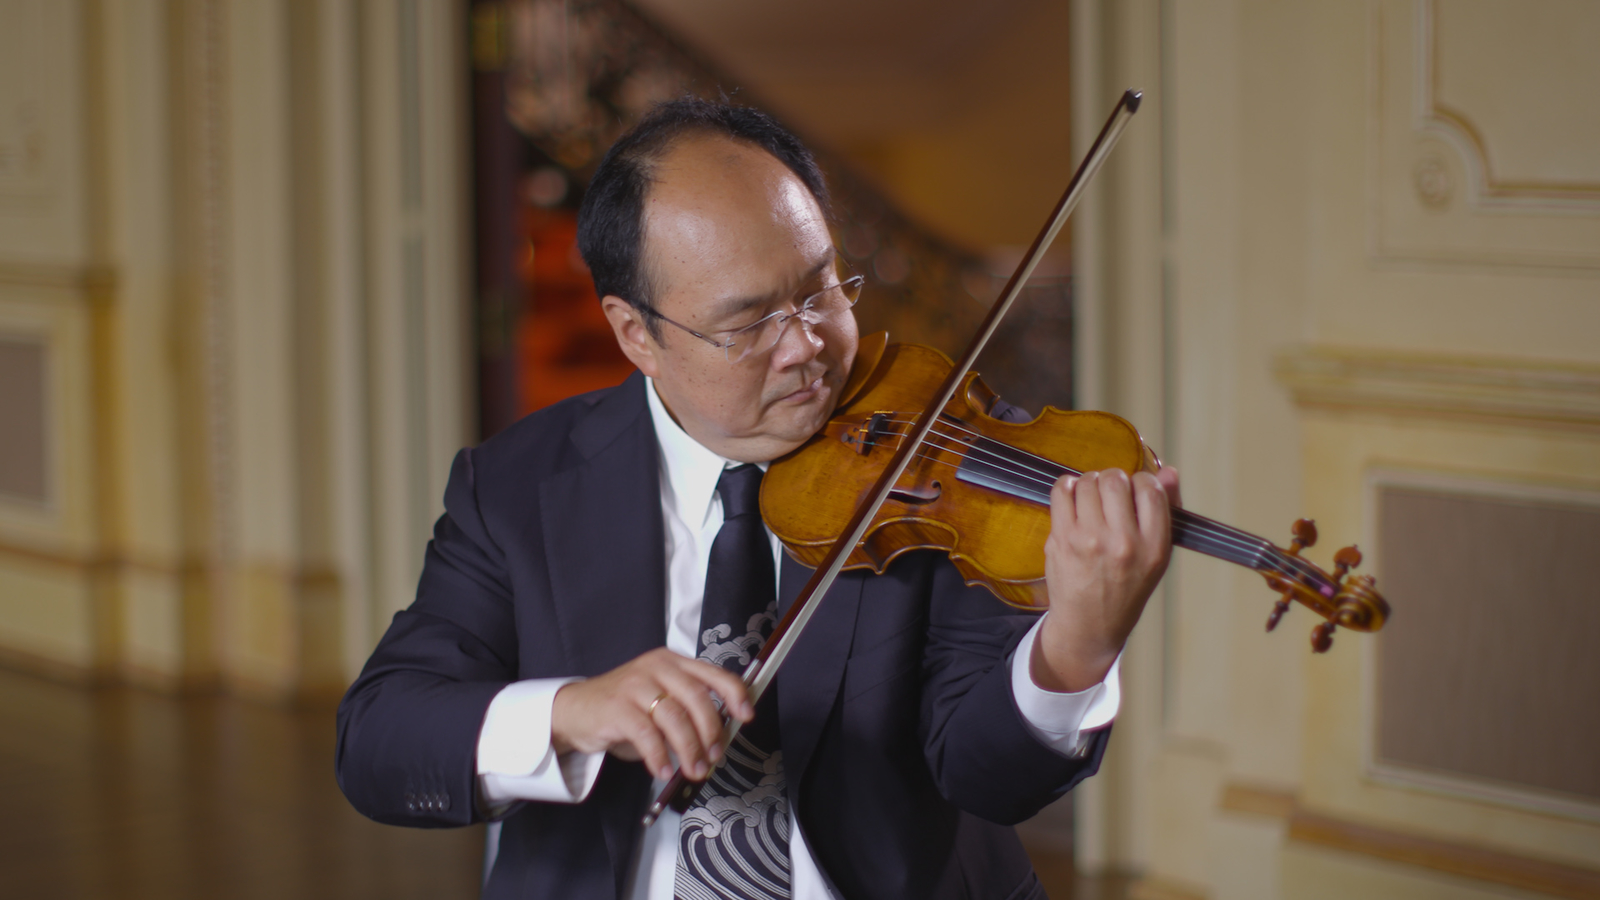 Robert Chen celebrates 25 years as concertmaster of the Chicago Symphony Orchestra: ‘I’m so blessed’ [Video]